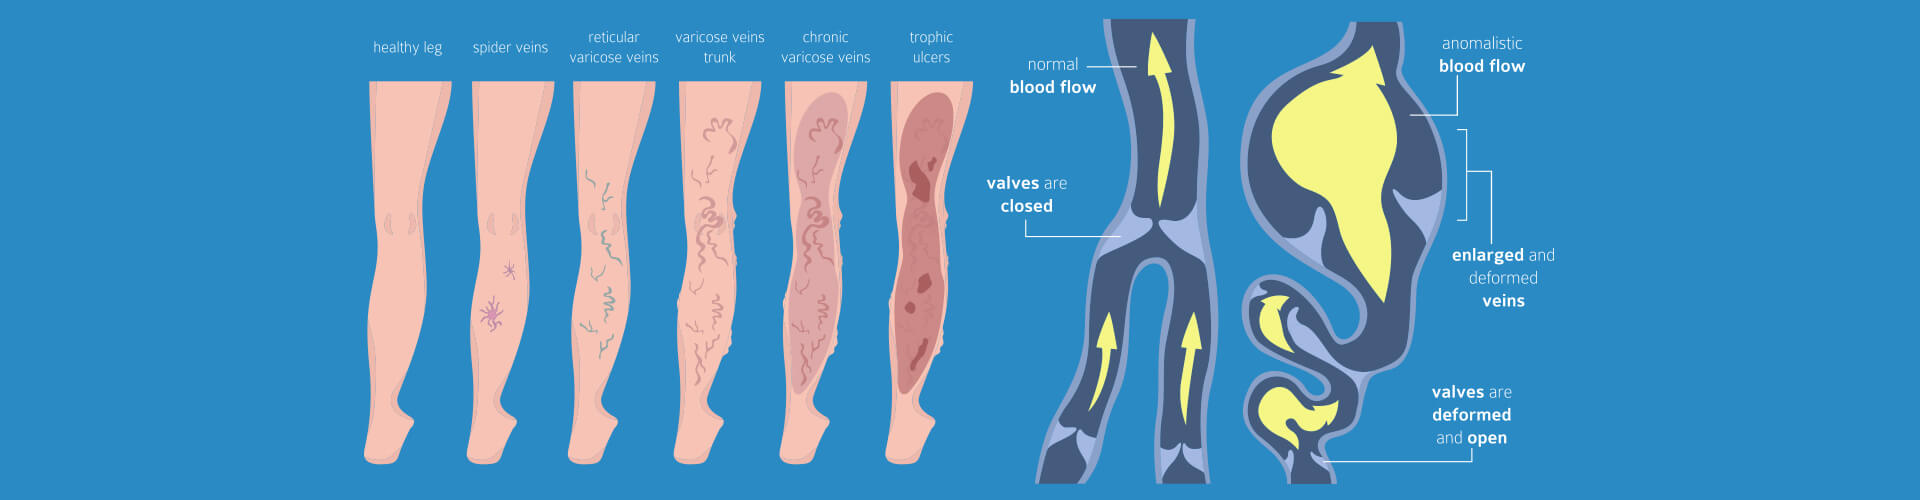 leg-pain-caused-by-varicose-veins-texas-cardiologist-near-me